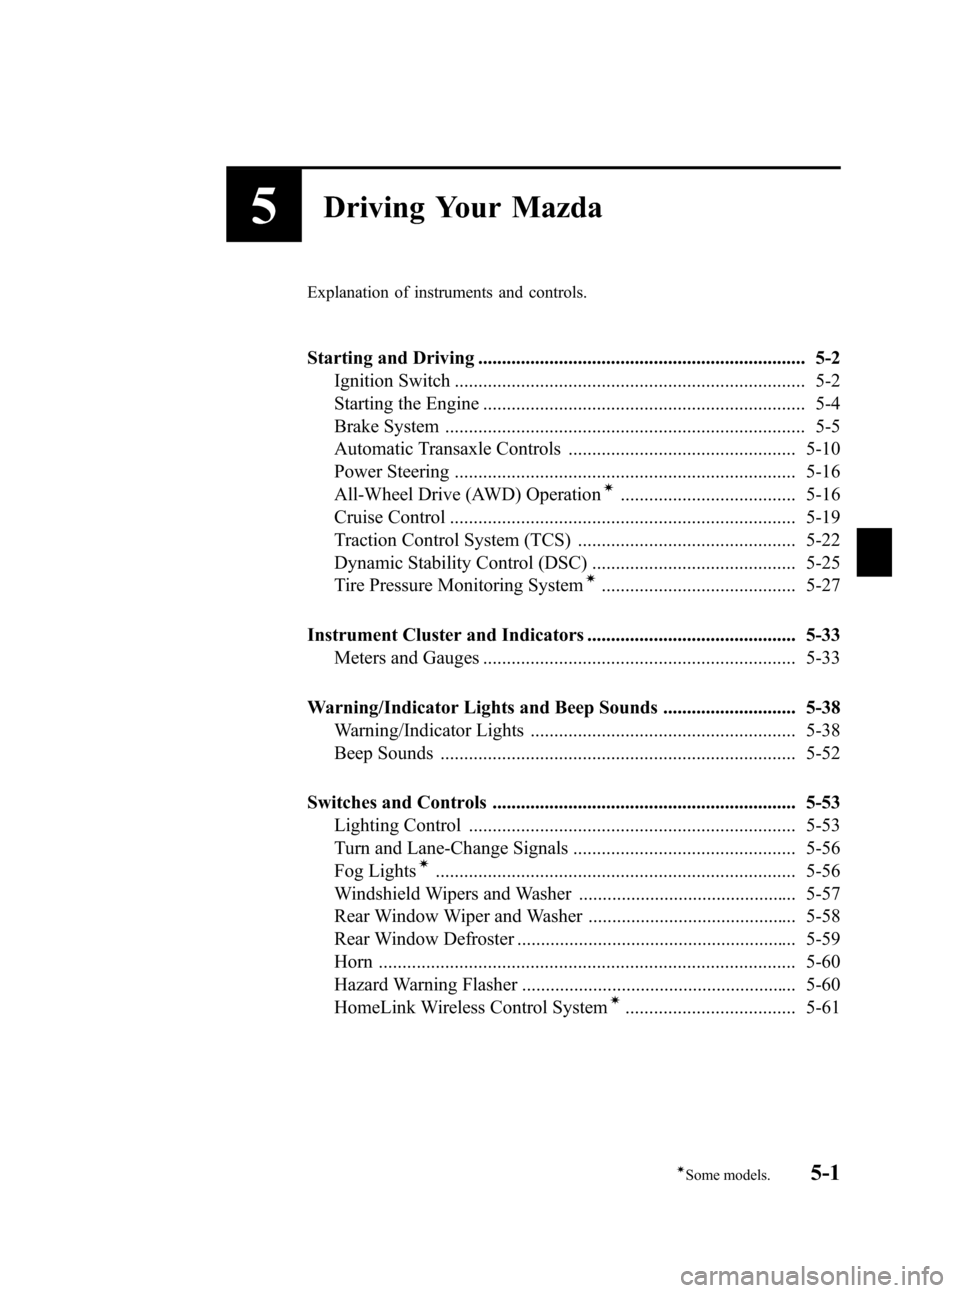 MAZDA MODEL CX-7 2009  Owners Manual (in English) Black plate (159,1)
5Driving Your Mazda
Explanation of instruments and controls.
Starting and Driving ..................................................................... 5-2
Ignition Switch ........